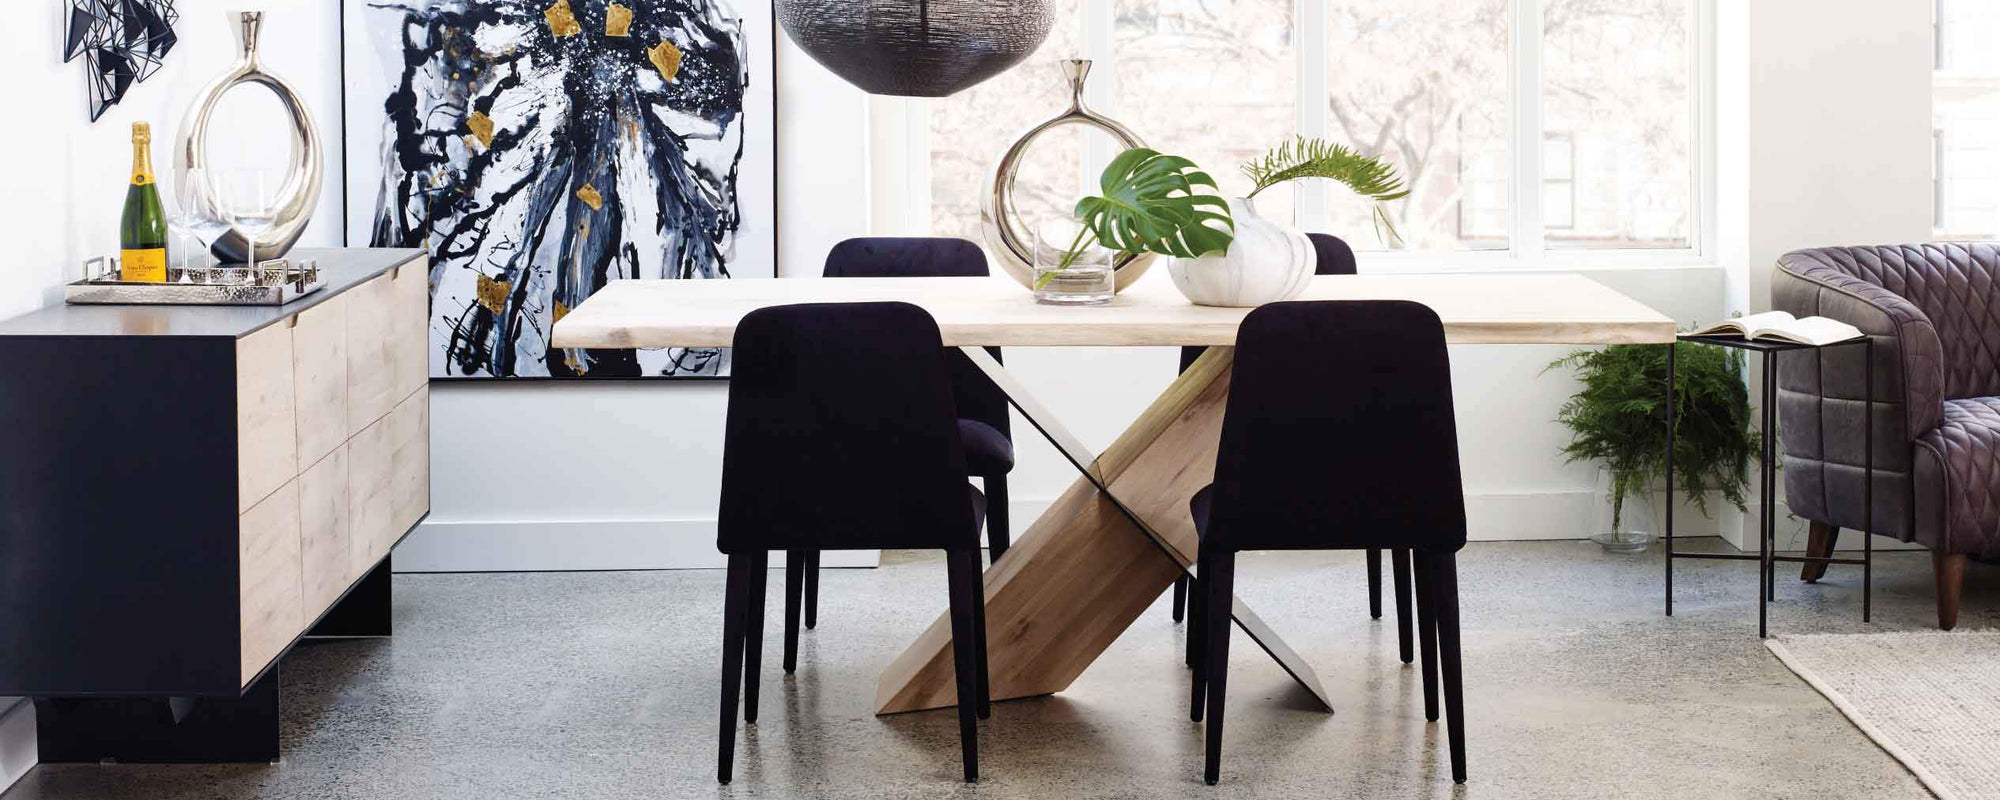 Dining Room Furniture from $64